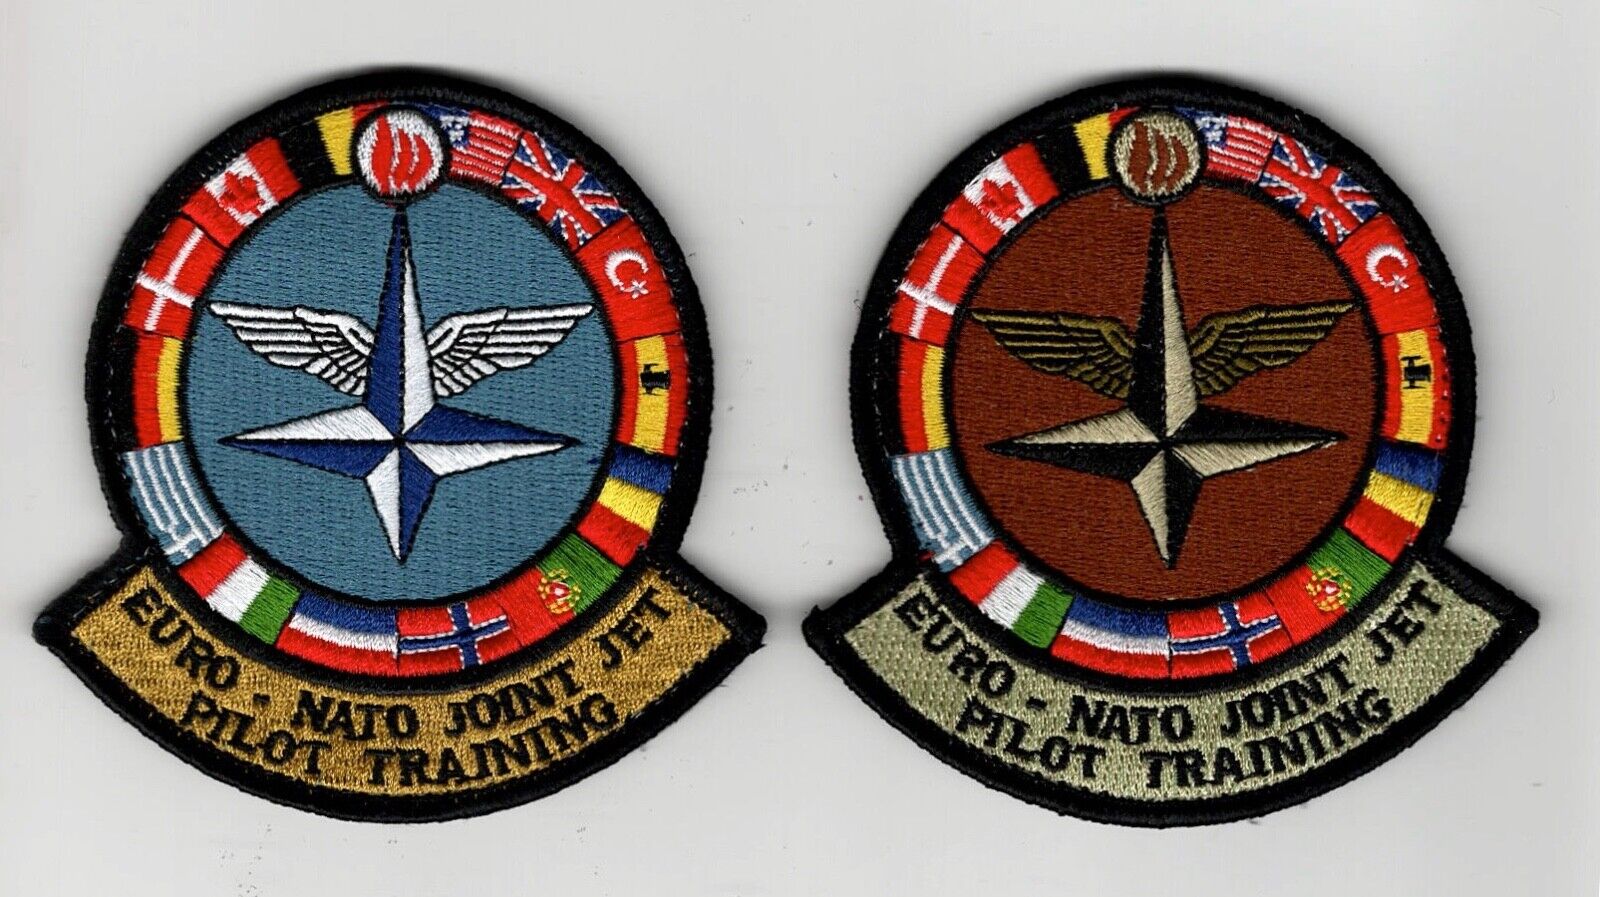 USAF EURO NATO JOINT JET PILOT TRNG, Sheppard AFB, TX 3.75\